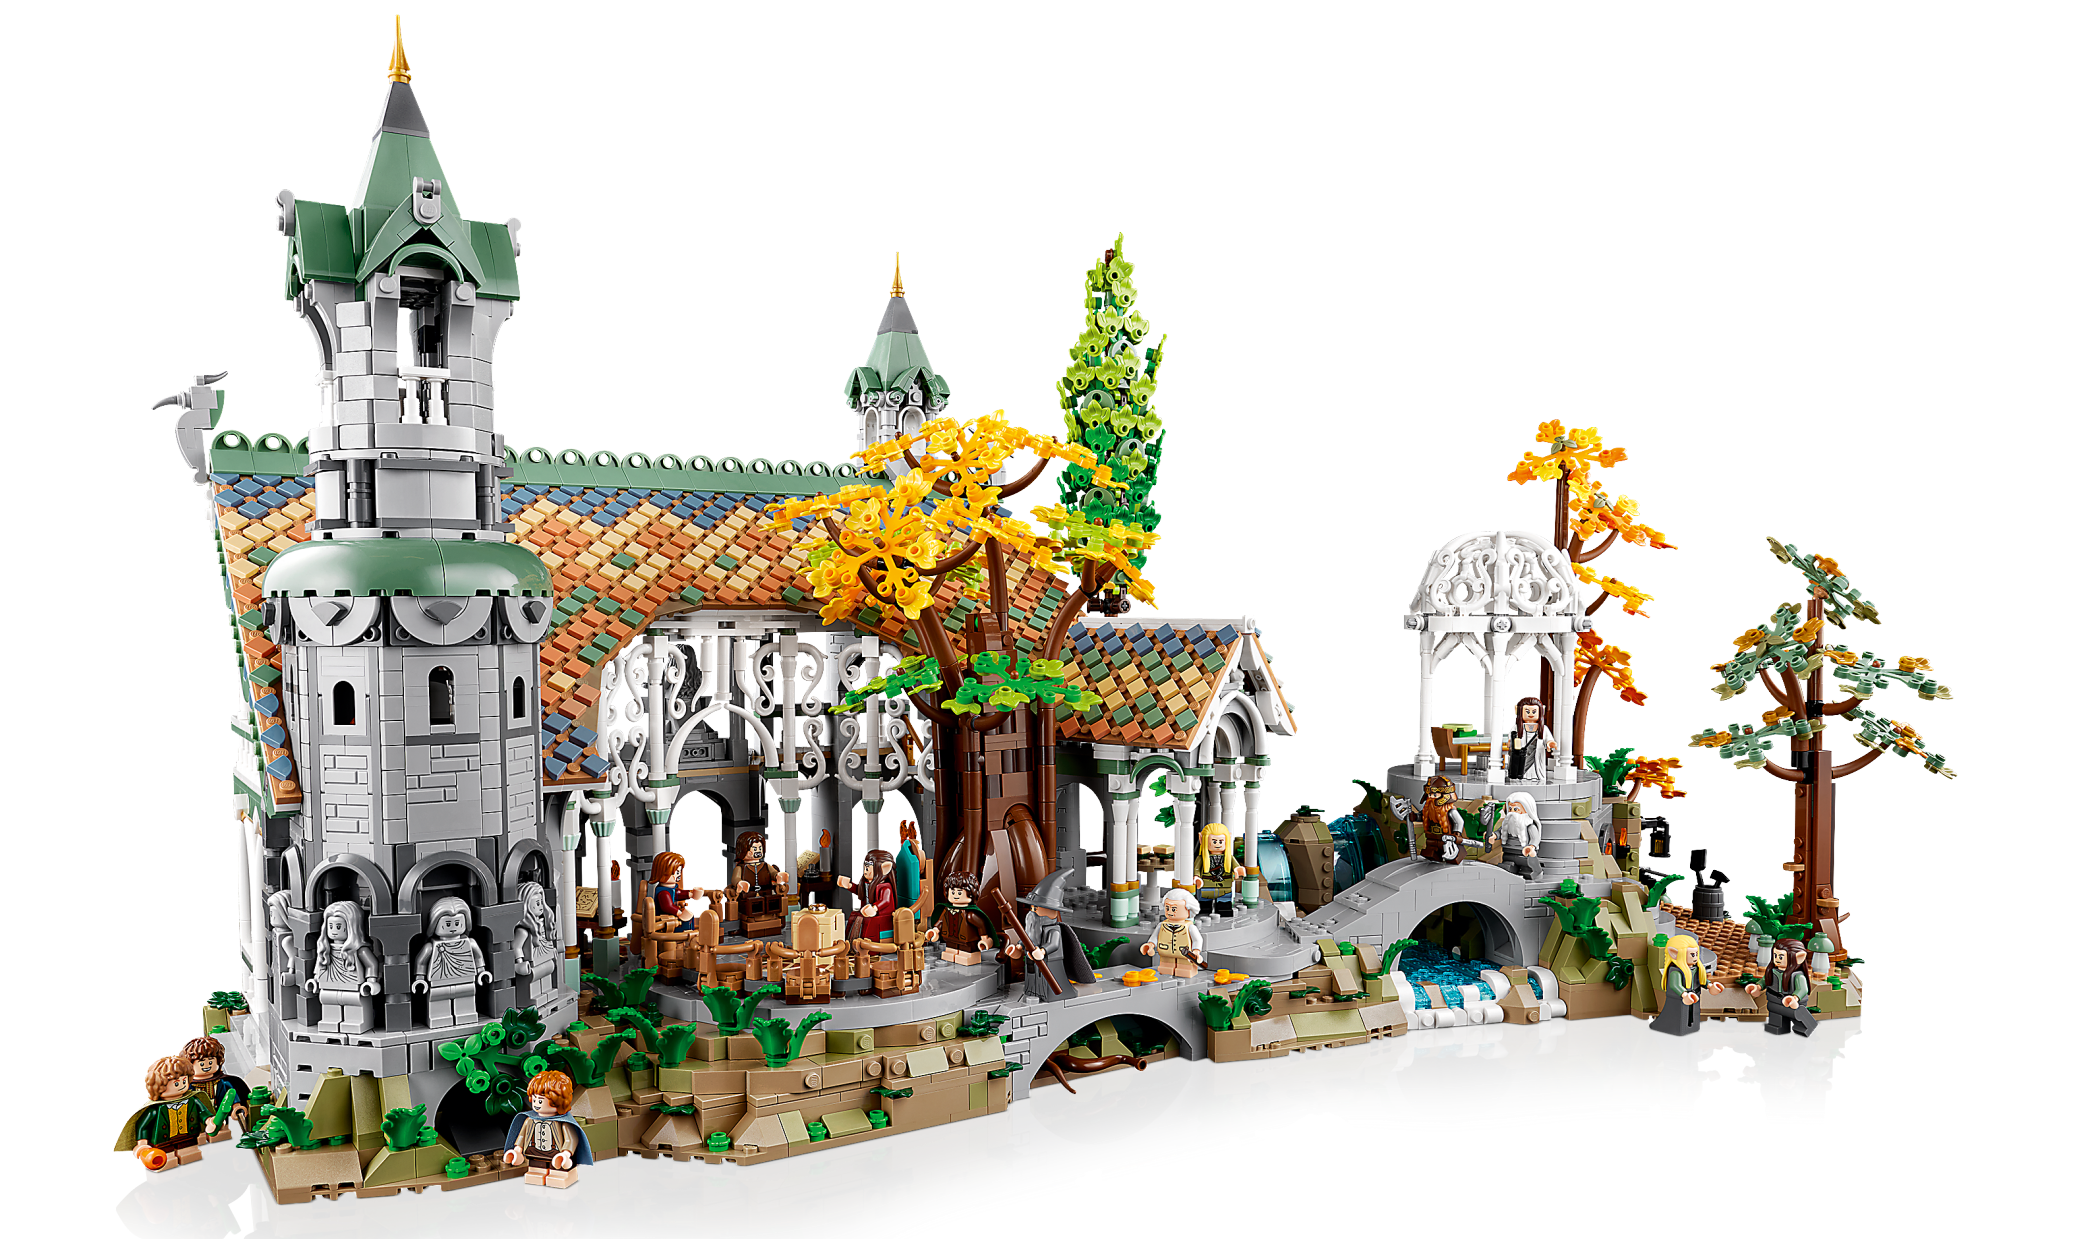 THE LORD OF THE RINGS: RIVENDELL™ 10316 | Lord the Rings™ | Buy at the Official LEGO® Shop US